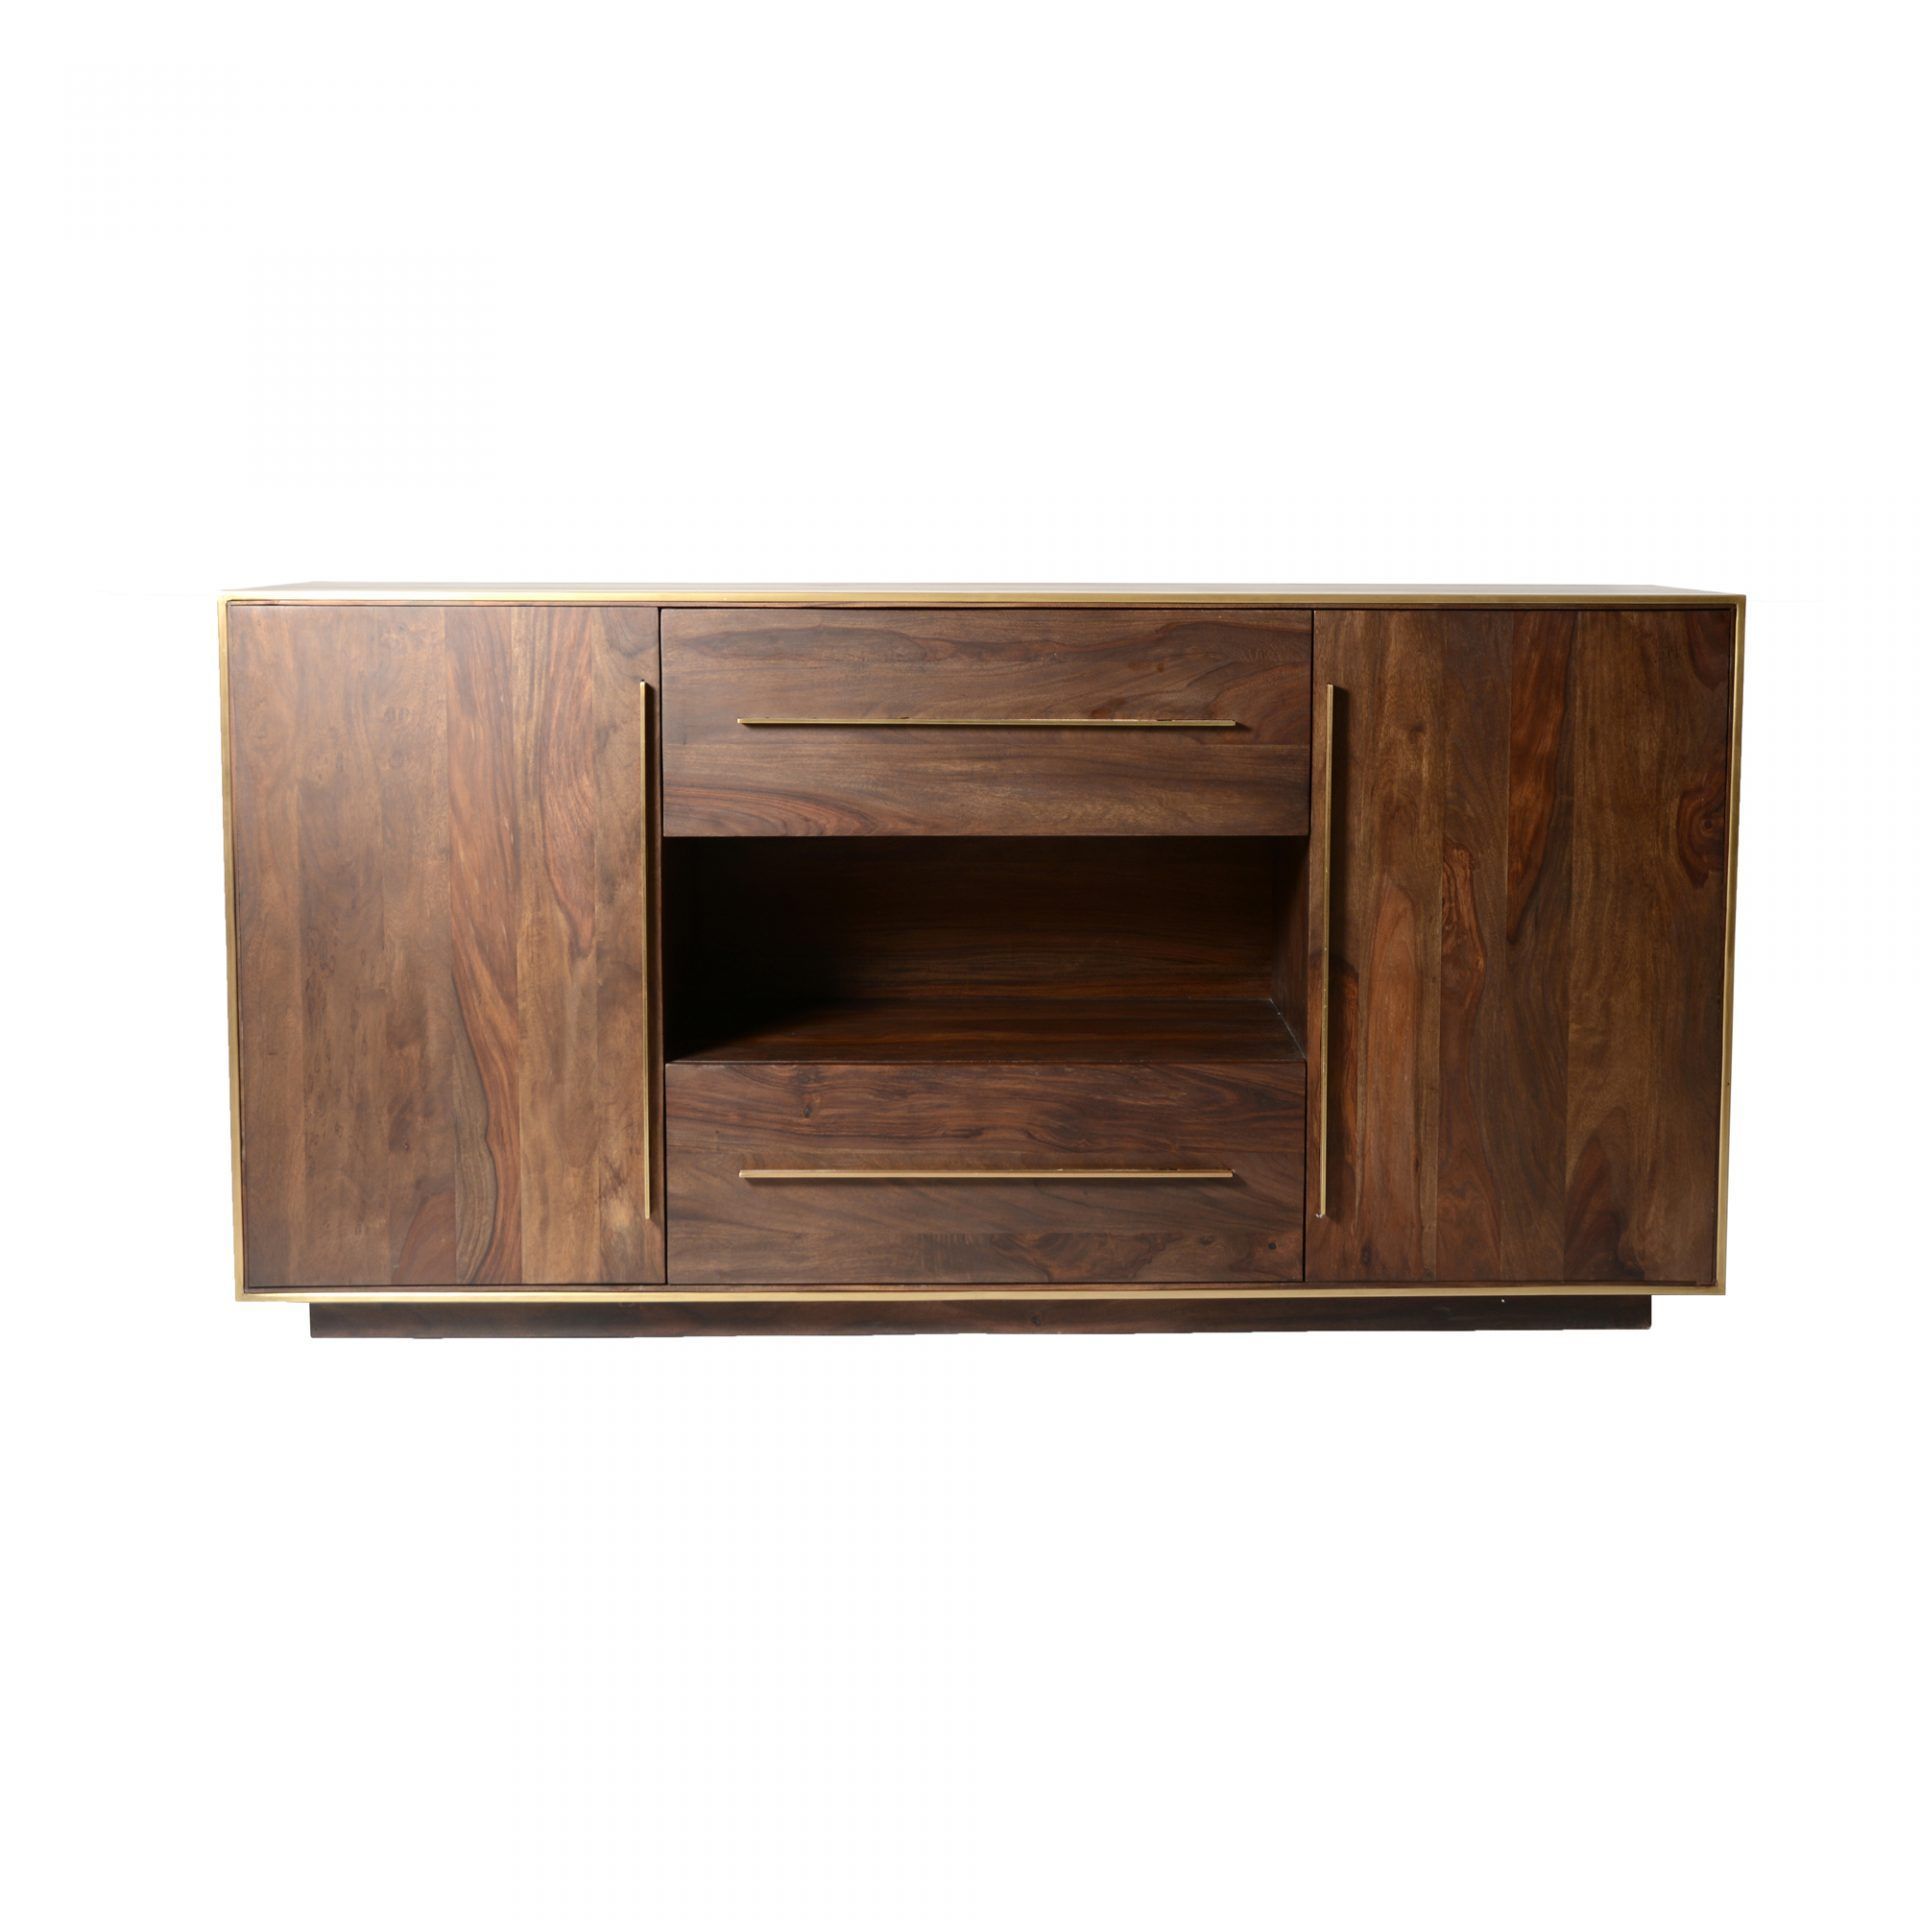 Pin On Curated Credenzas Pertaining To Barr Credenzas (View 2 of 30)